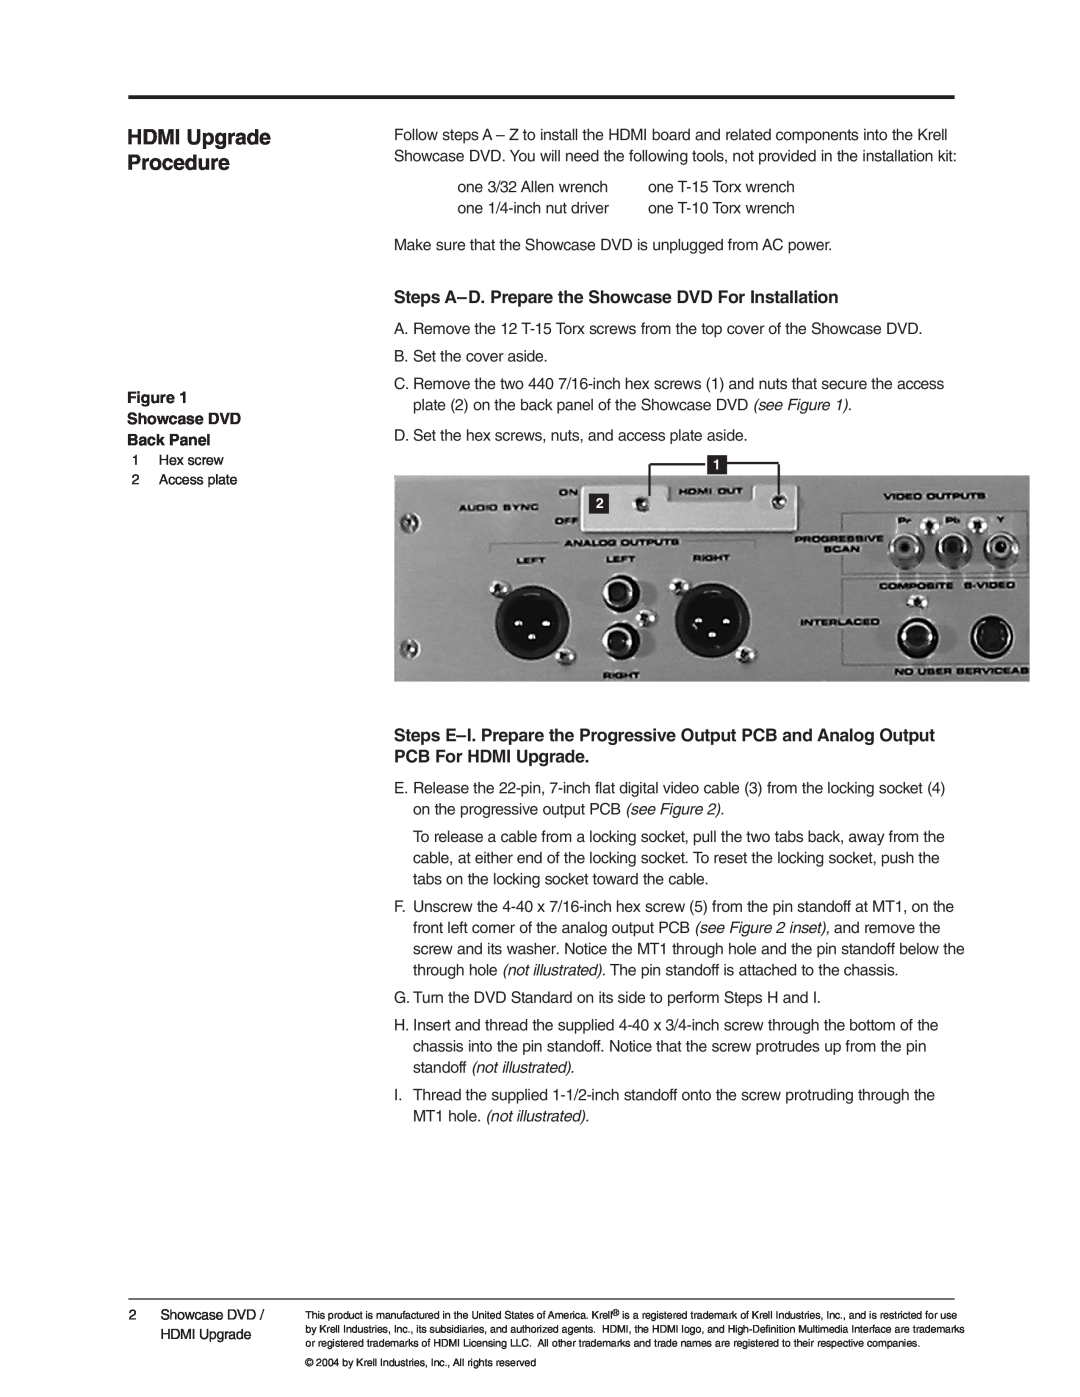 Krell Industries DVD Player manual HDMI Upgrade Procedure, Steps A-D. Prepare the Showcase DVD For Installation 